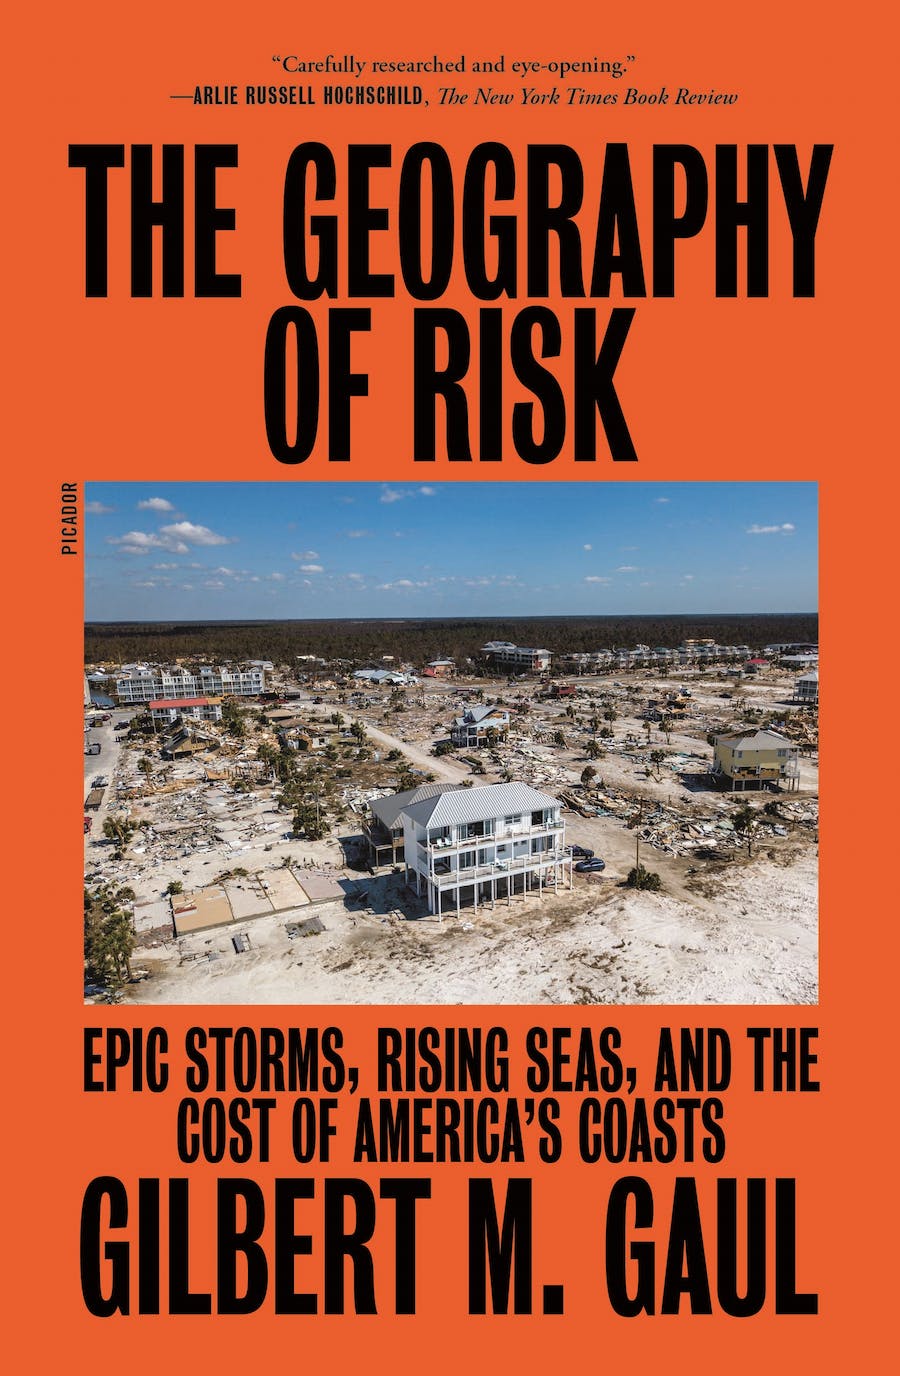 Geography of Risk by Gilbert M. Gaul